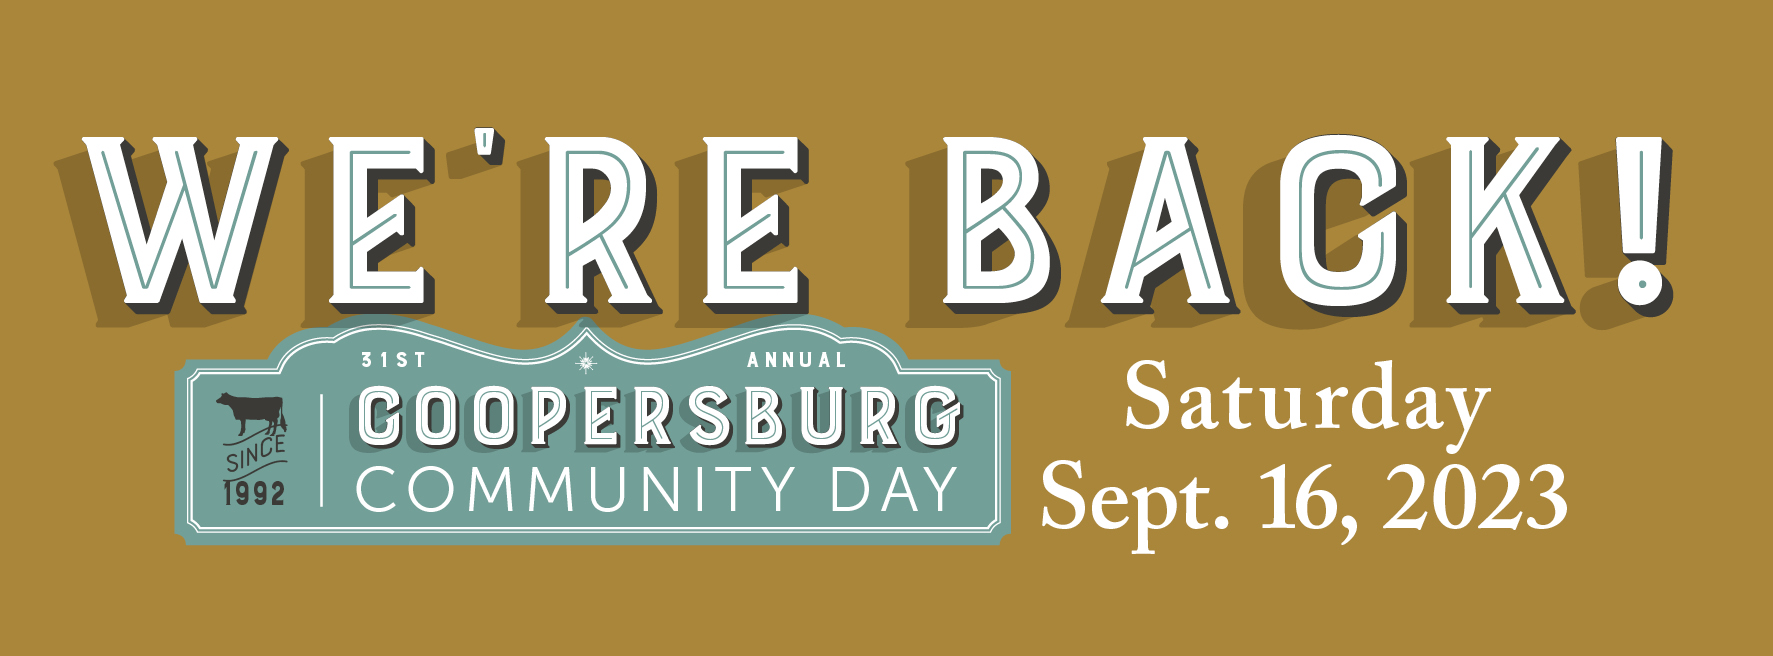 We are excited that this year’s Coopersburg Community Day event is back